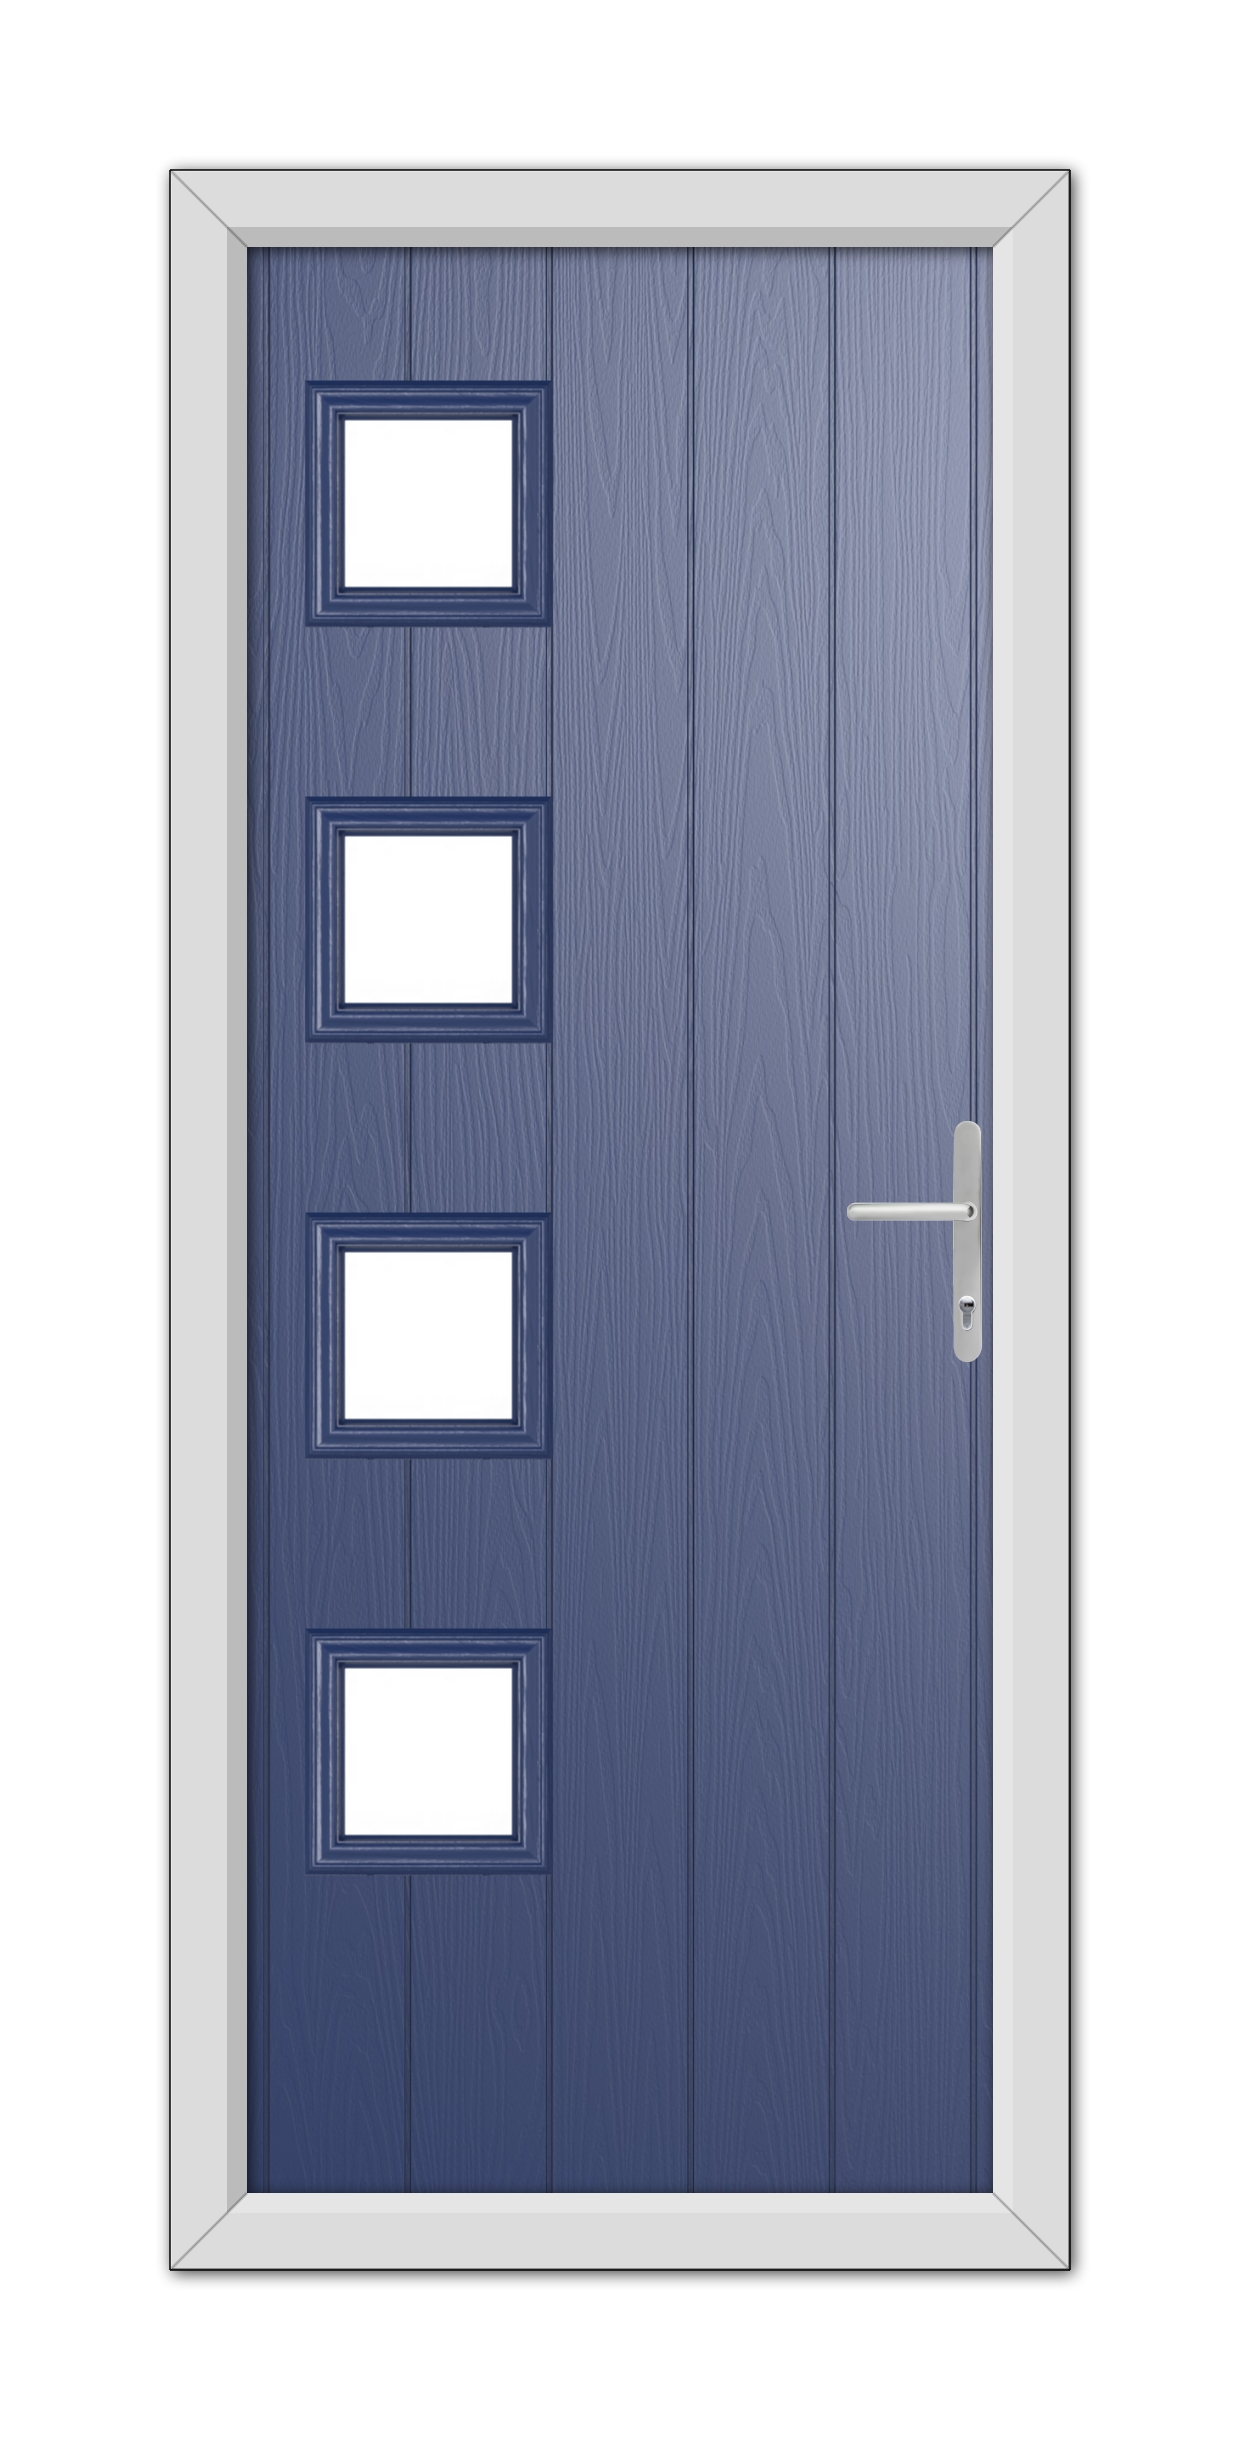 A modern Blue Sussex Composite Door 48mm Timber Core featuring four rectangular glass panels aligned vertically on the left side, with a silver handle on the right.